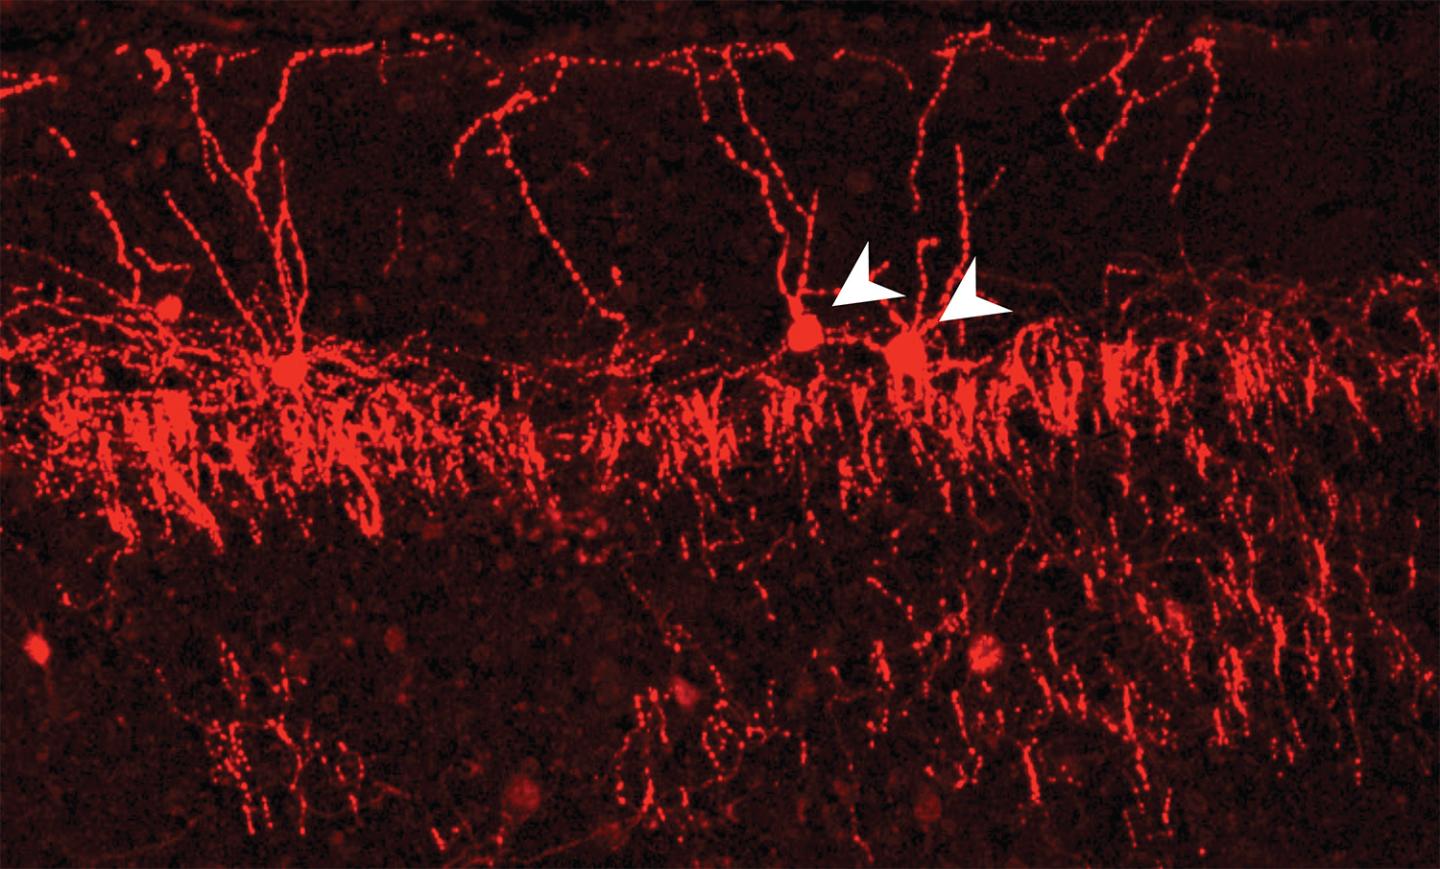 Chandelier Cells Selectively Engaging with Local Neurons